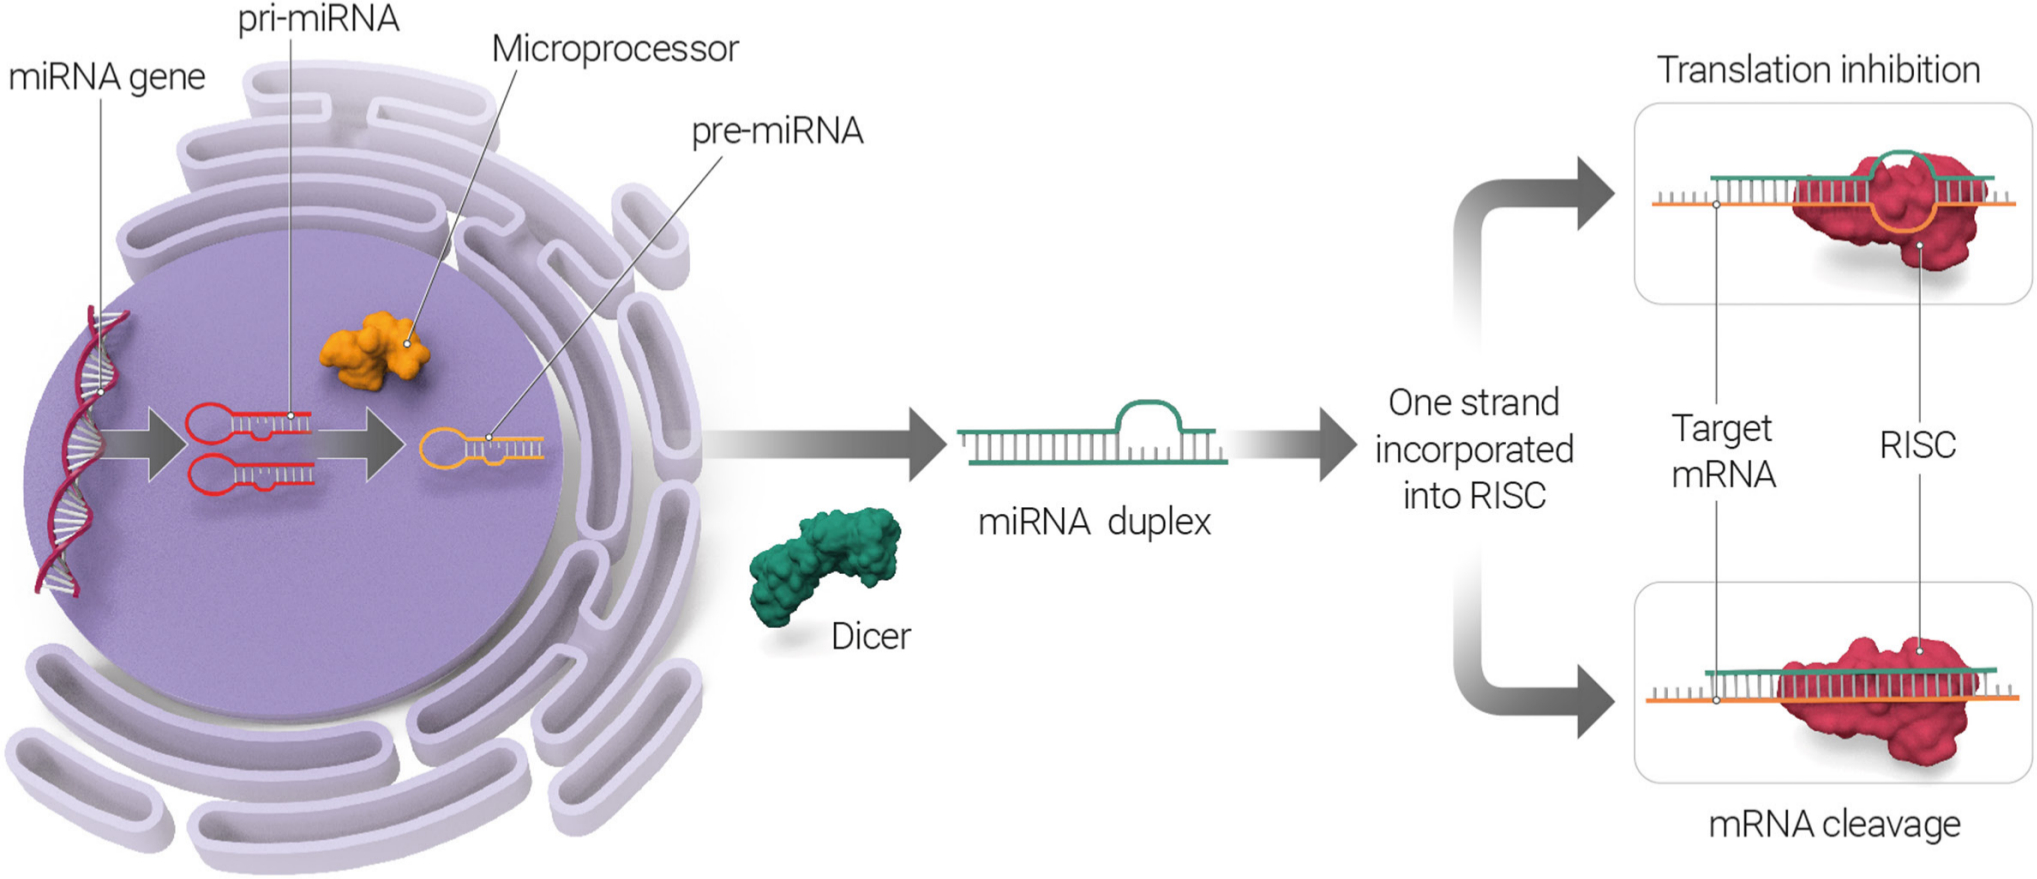 Fig. 1 
            MicroRNA (miRNA) biogenesis pathway. miRNAs are transcribed in the nucleus, generating primary miRNAs (pri-miRNAs) that undergo nuclear cleavage to form precursor miRNAs (pre-miRNAs). In the cytoplasm, pre-miRNAs are further processed by the Dicer. The double-stranded RNA duplex unwinds and then the mature single-stranded miRNAs assemble into RNA-induced silencing complex (RISC). The miRNA targets messenger RNA (mRNA) to either inhibit mRNA translation or induce mRNA cleavage and degradation.
          